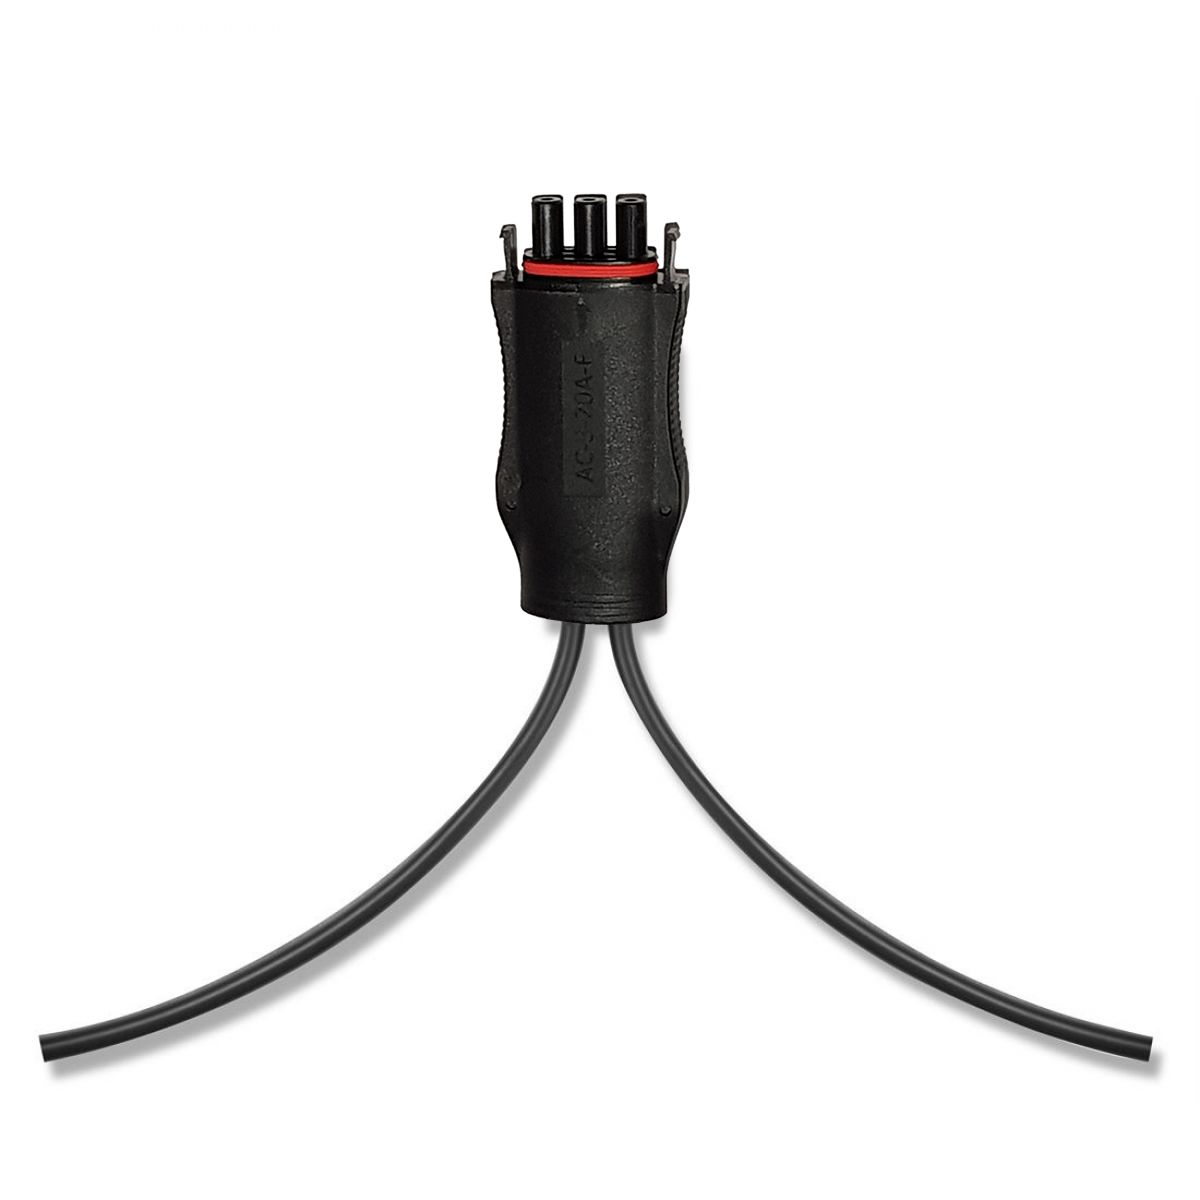 APsystems DC Extension Cable - RES Supply